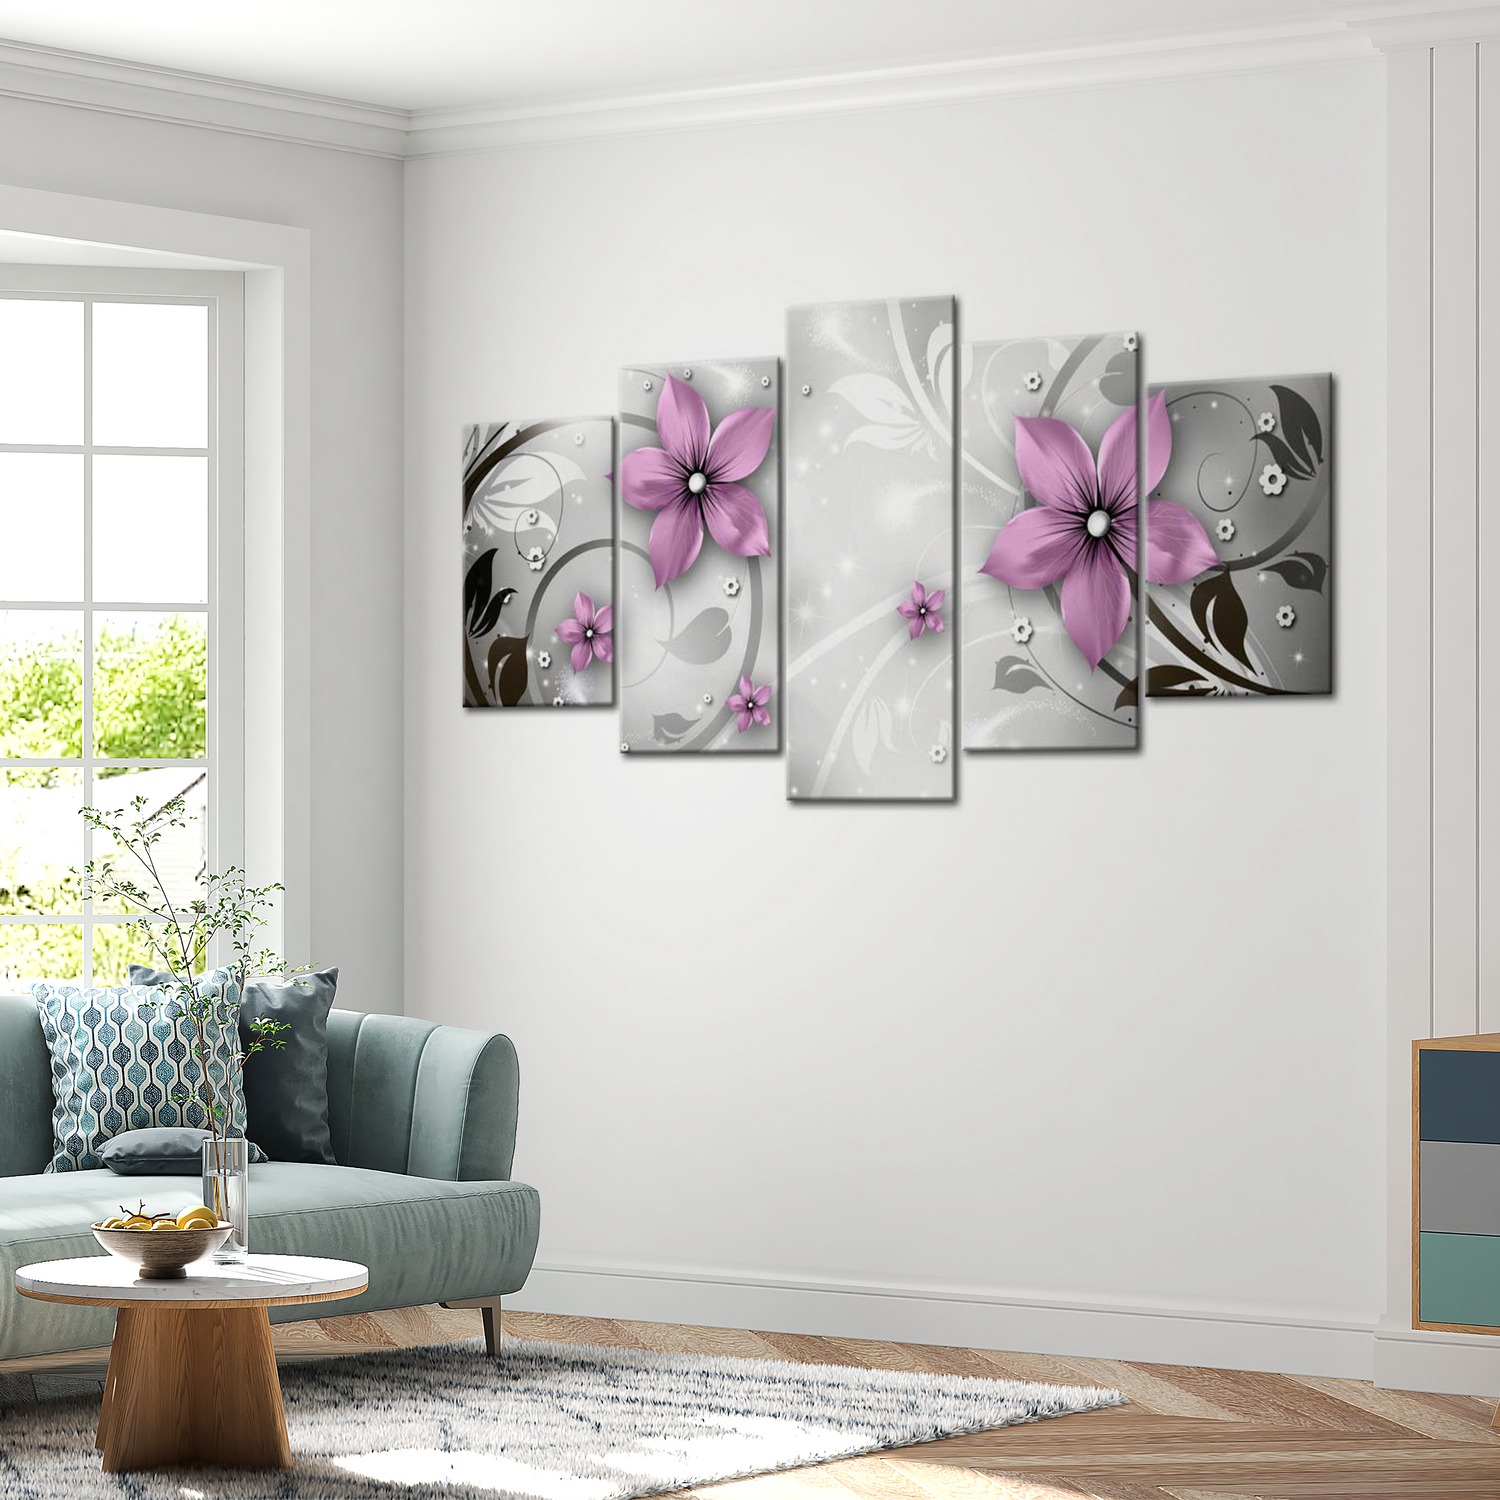 Stretched Canvas Glamour Art - Saucy Flowers 40"Wx20"H